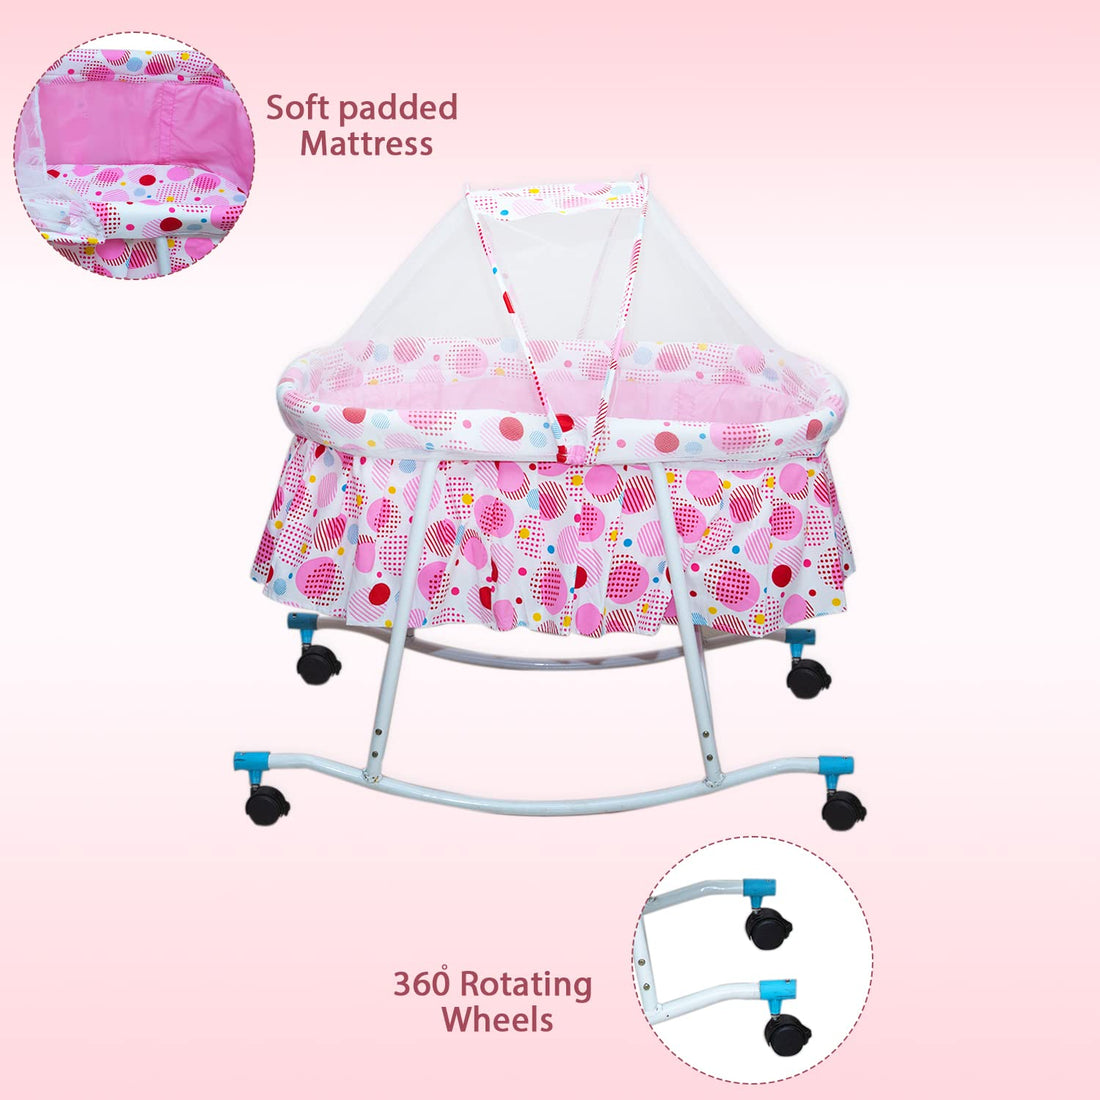 Mee Mee - Soft Padded Mattress and Rotating Wheels Cradle